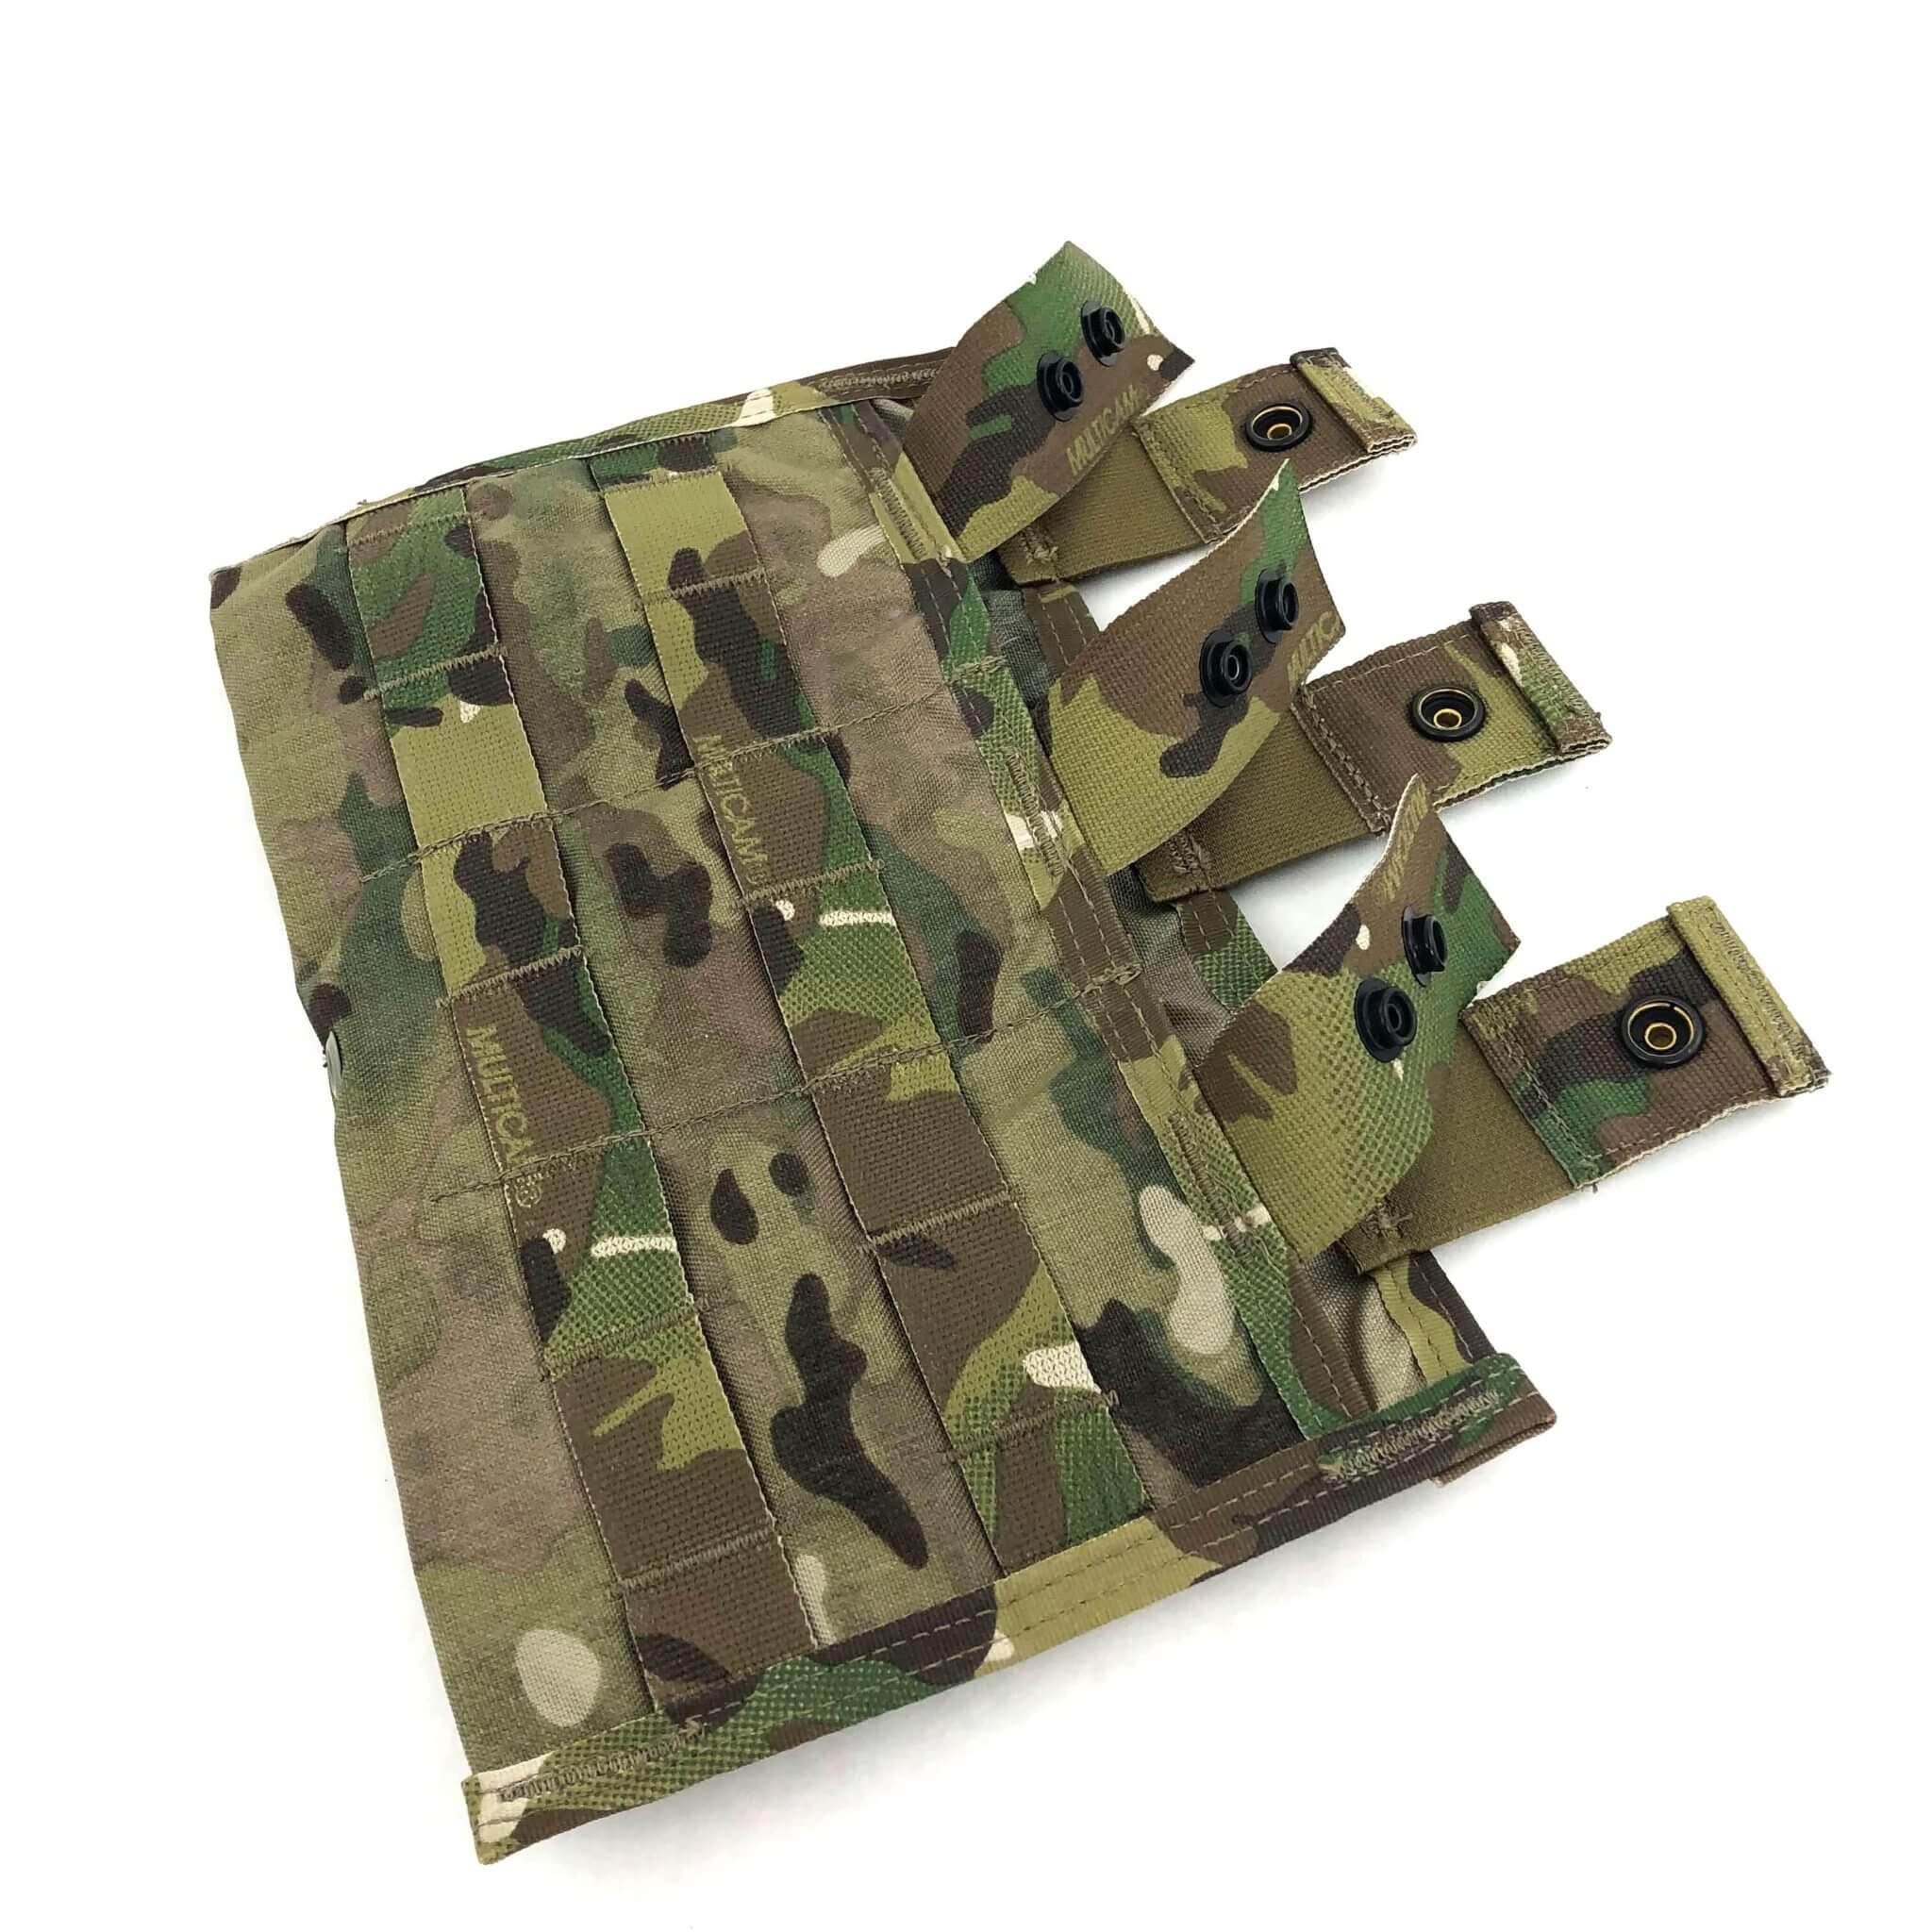 NEW Eagle Industries Multicam 5.56 Gunners Ammo Pouch SOFLCS MOLLE 